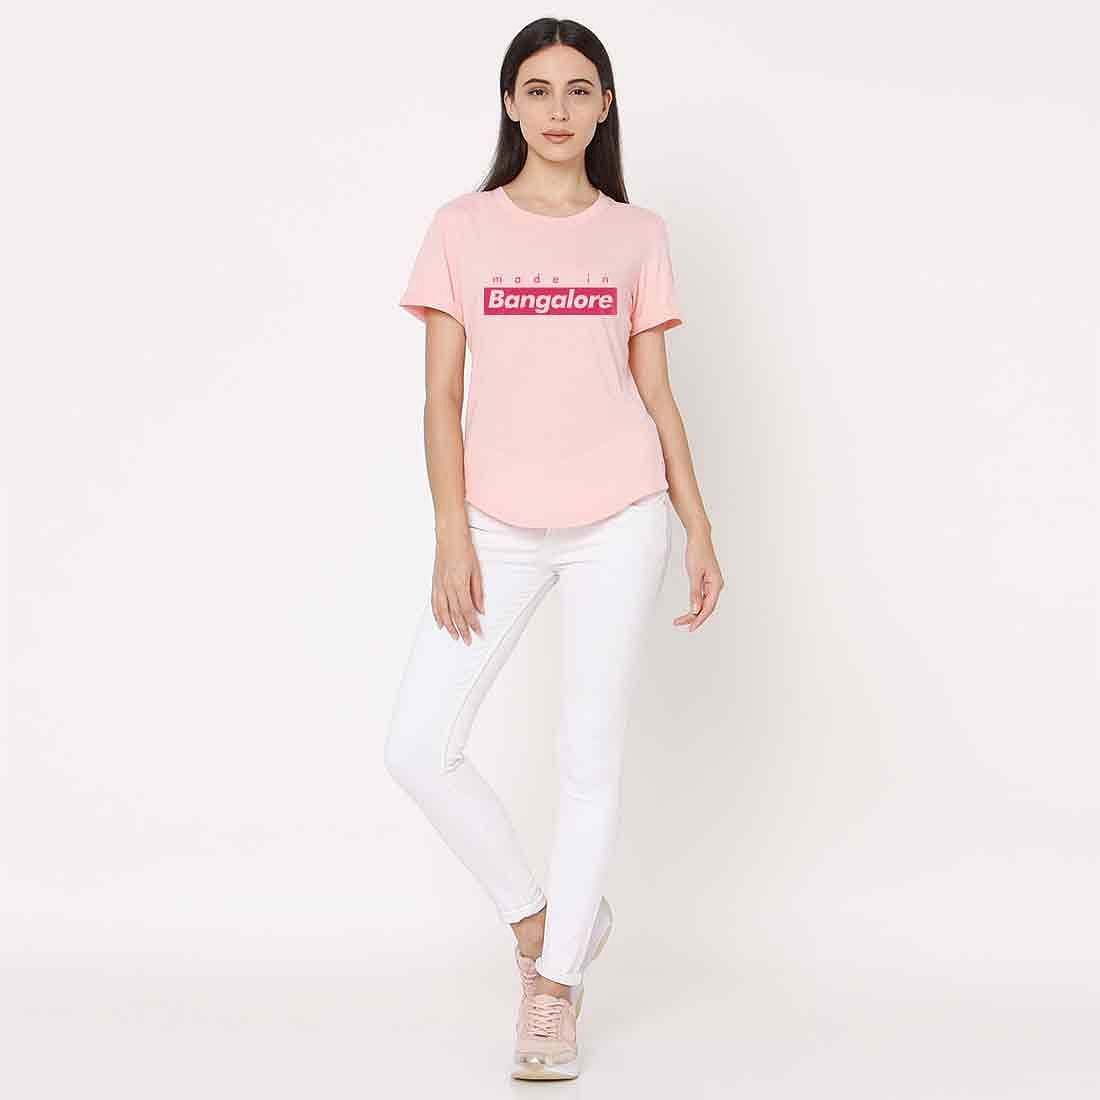 Funny T shirts For Women Hometown Tees - Made In Bangalore Nutcase